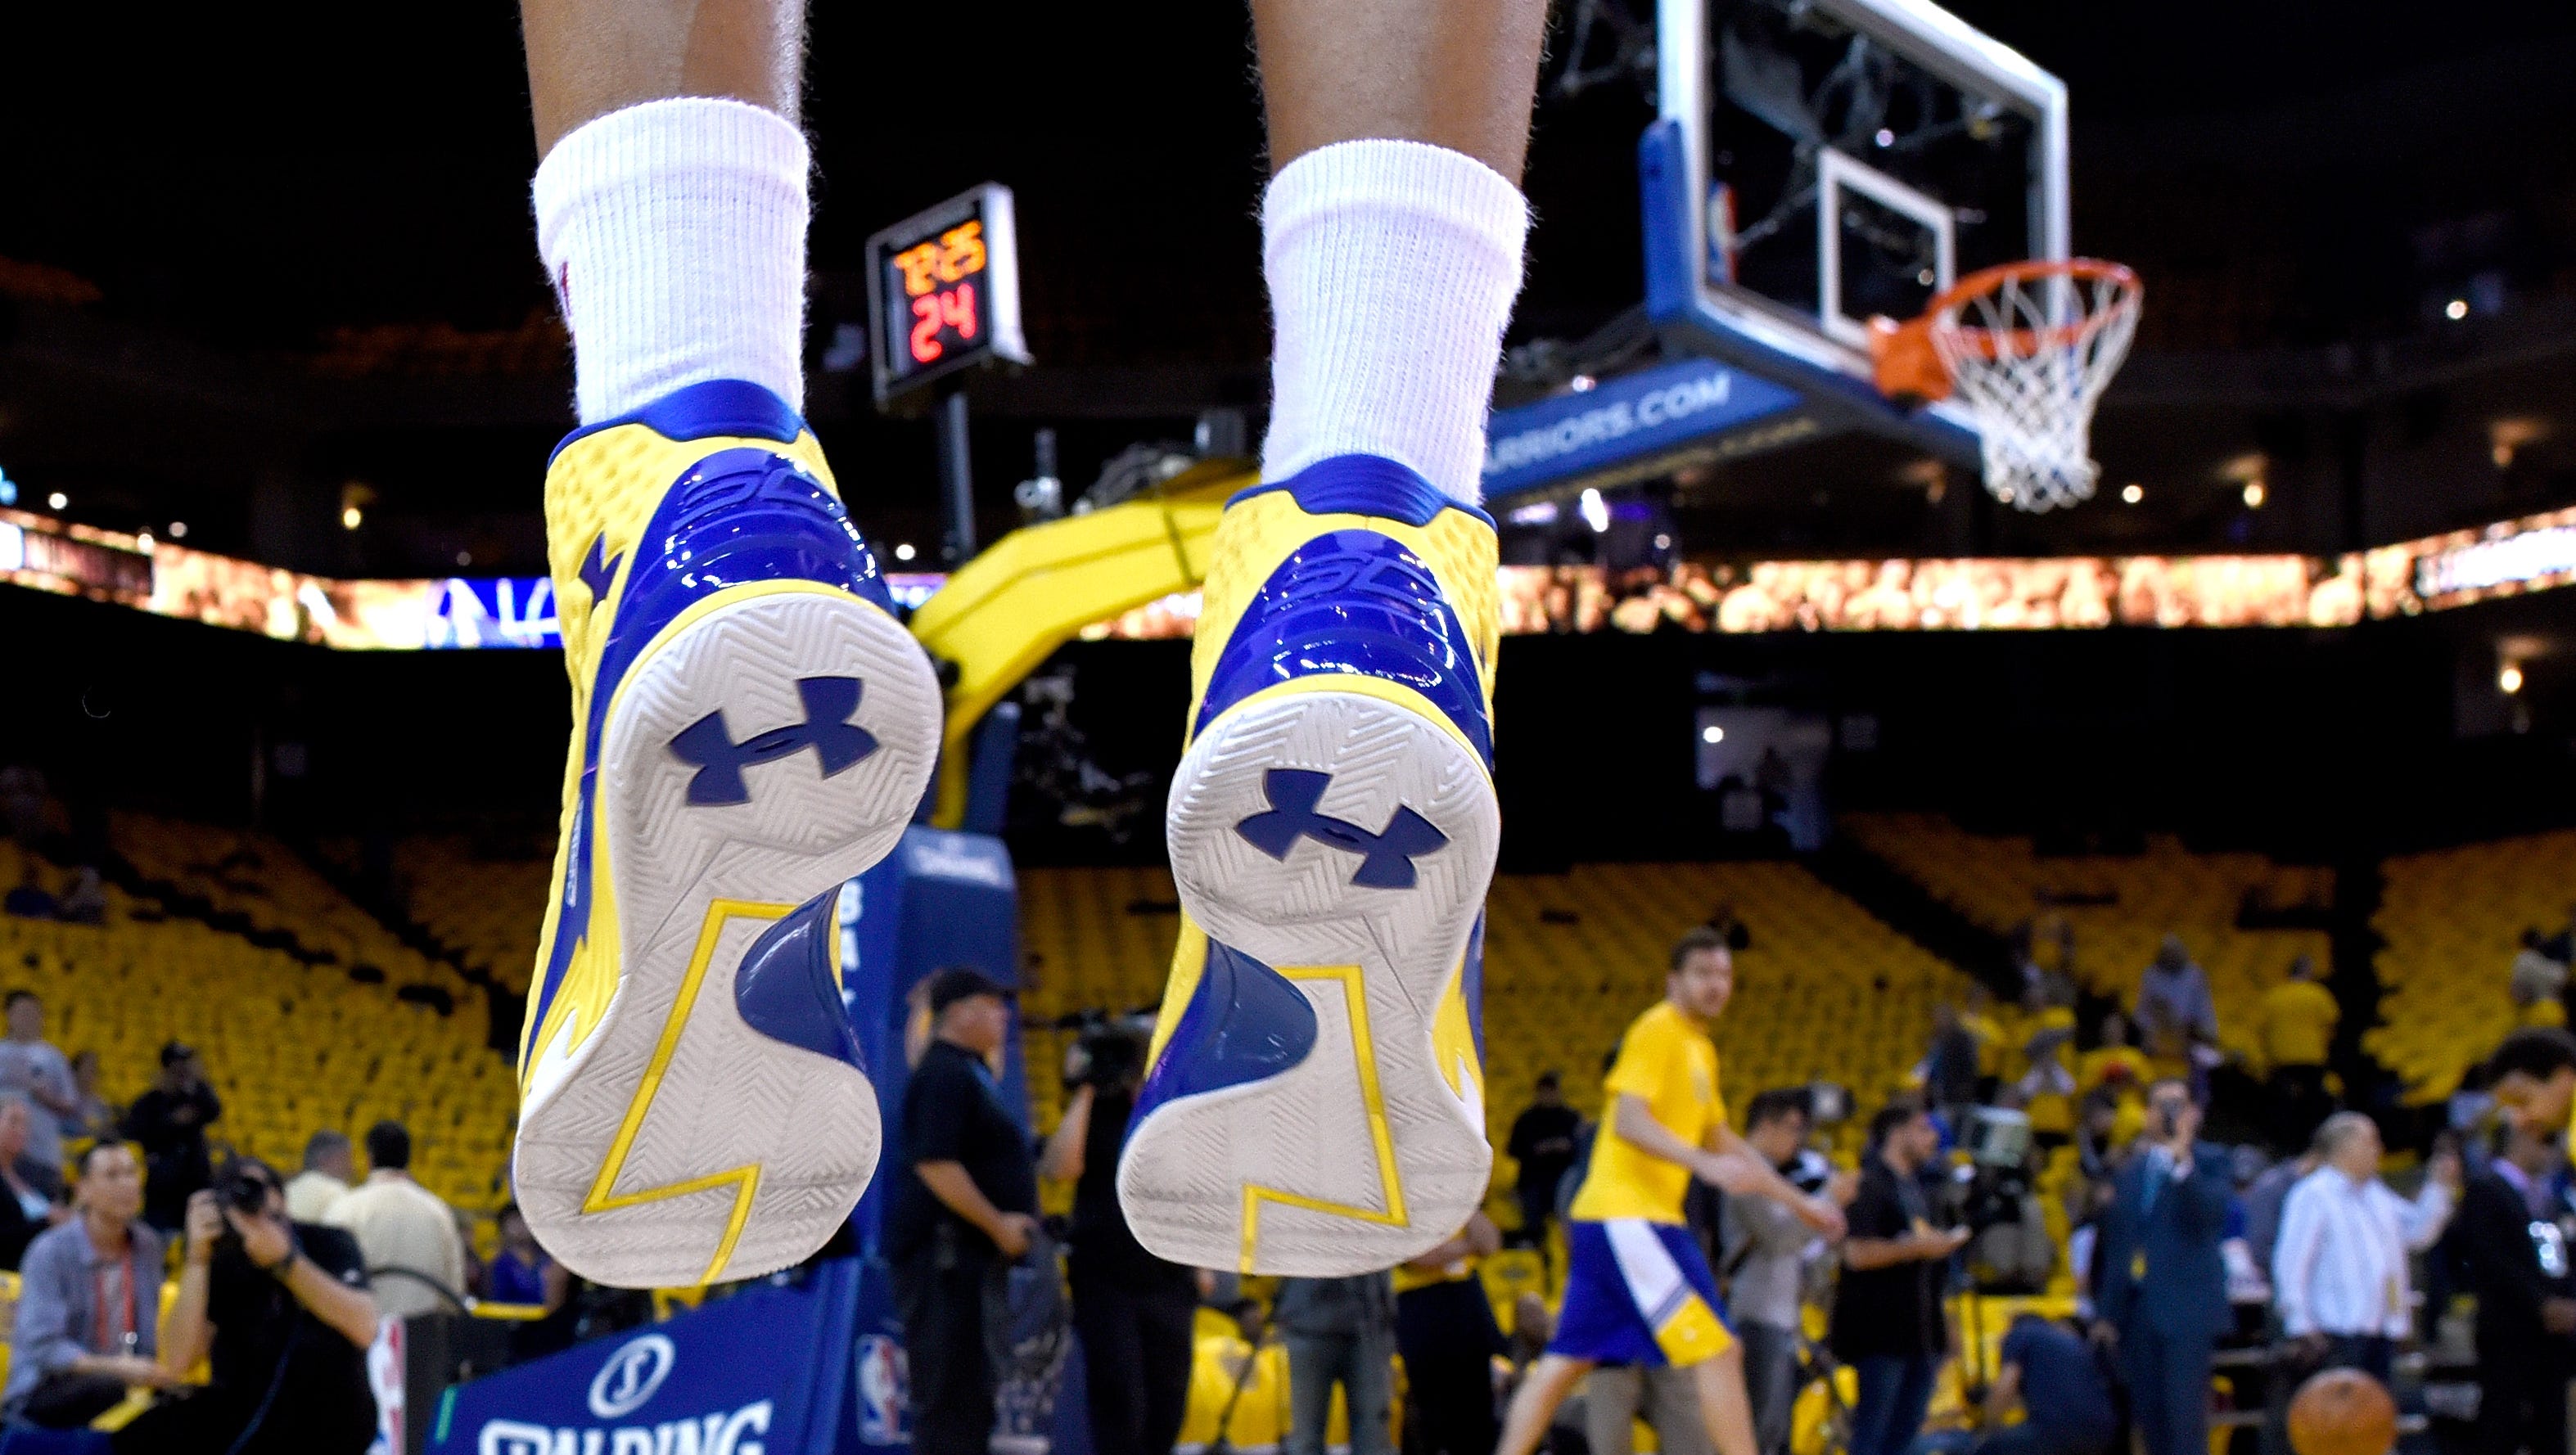 patroon Opknappen Buiten adem Under Armour soars 23% with Stephen Curry